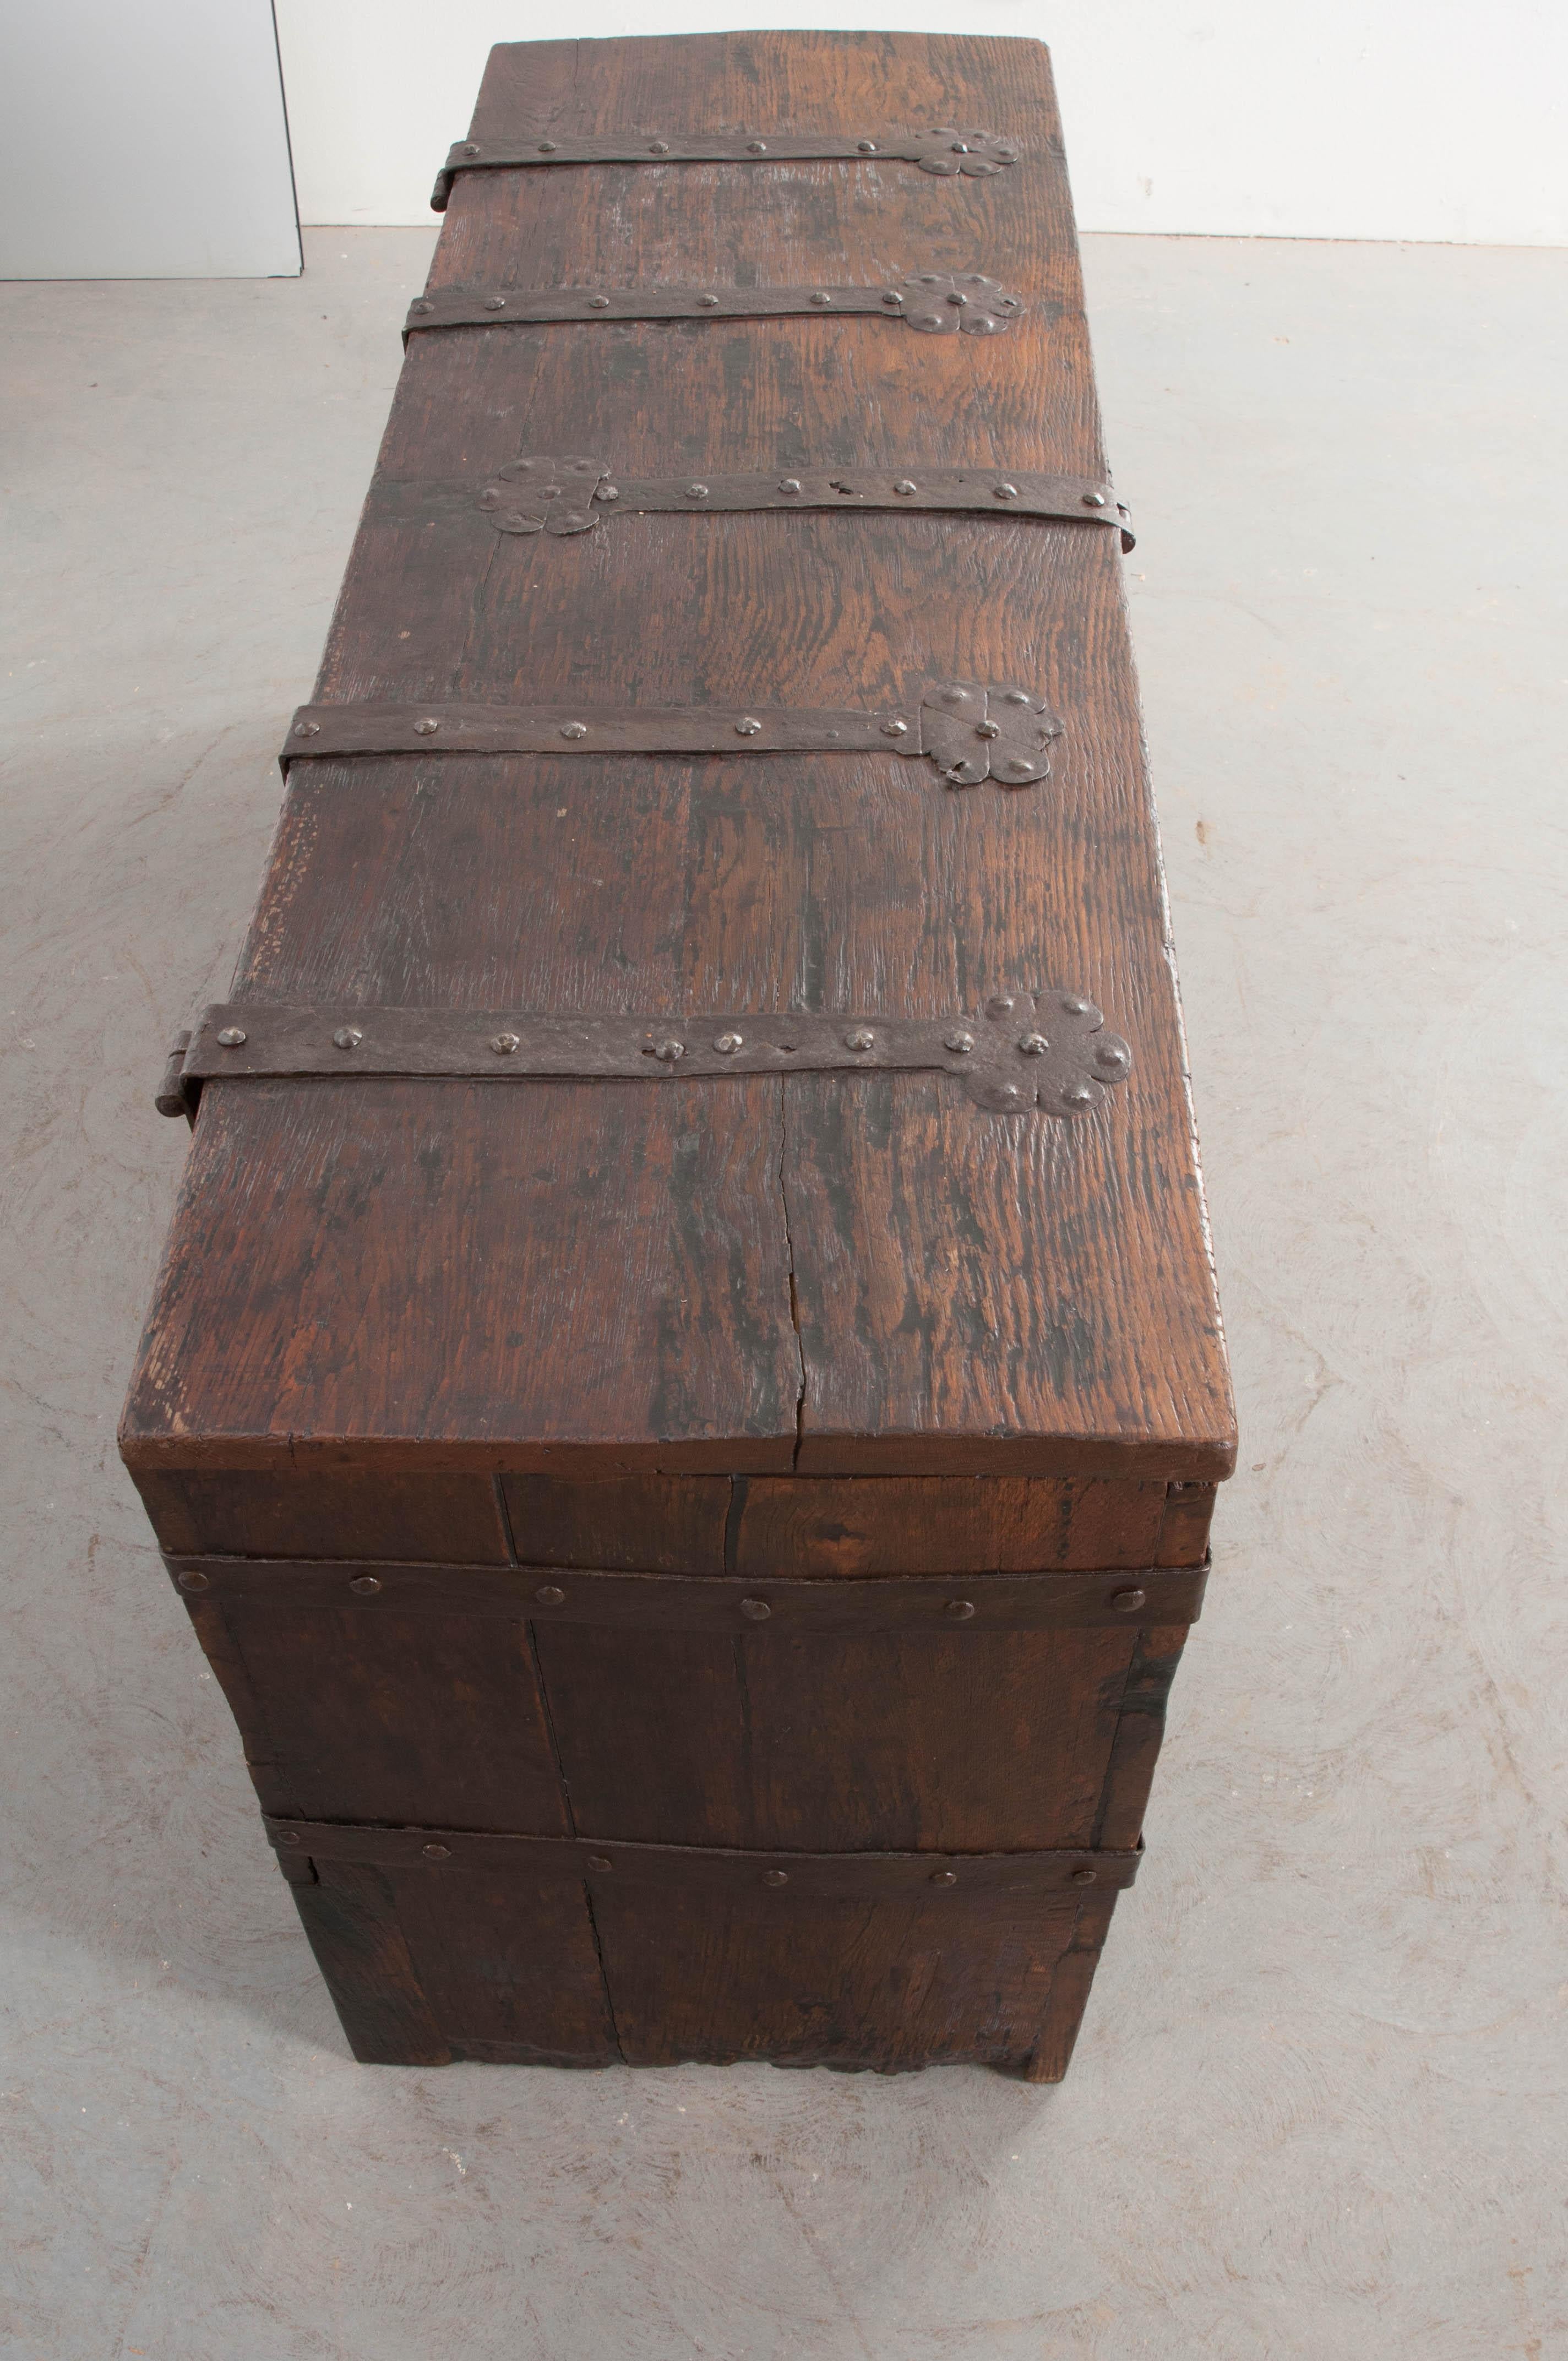 Spanish Colonial Spanish 18th Century Oak and Iron Bound Trunk